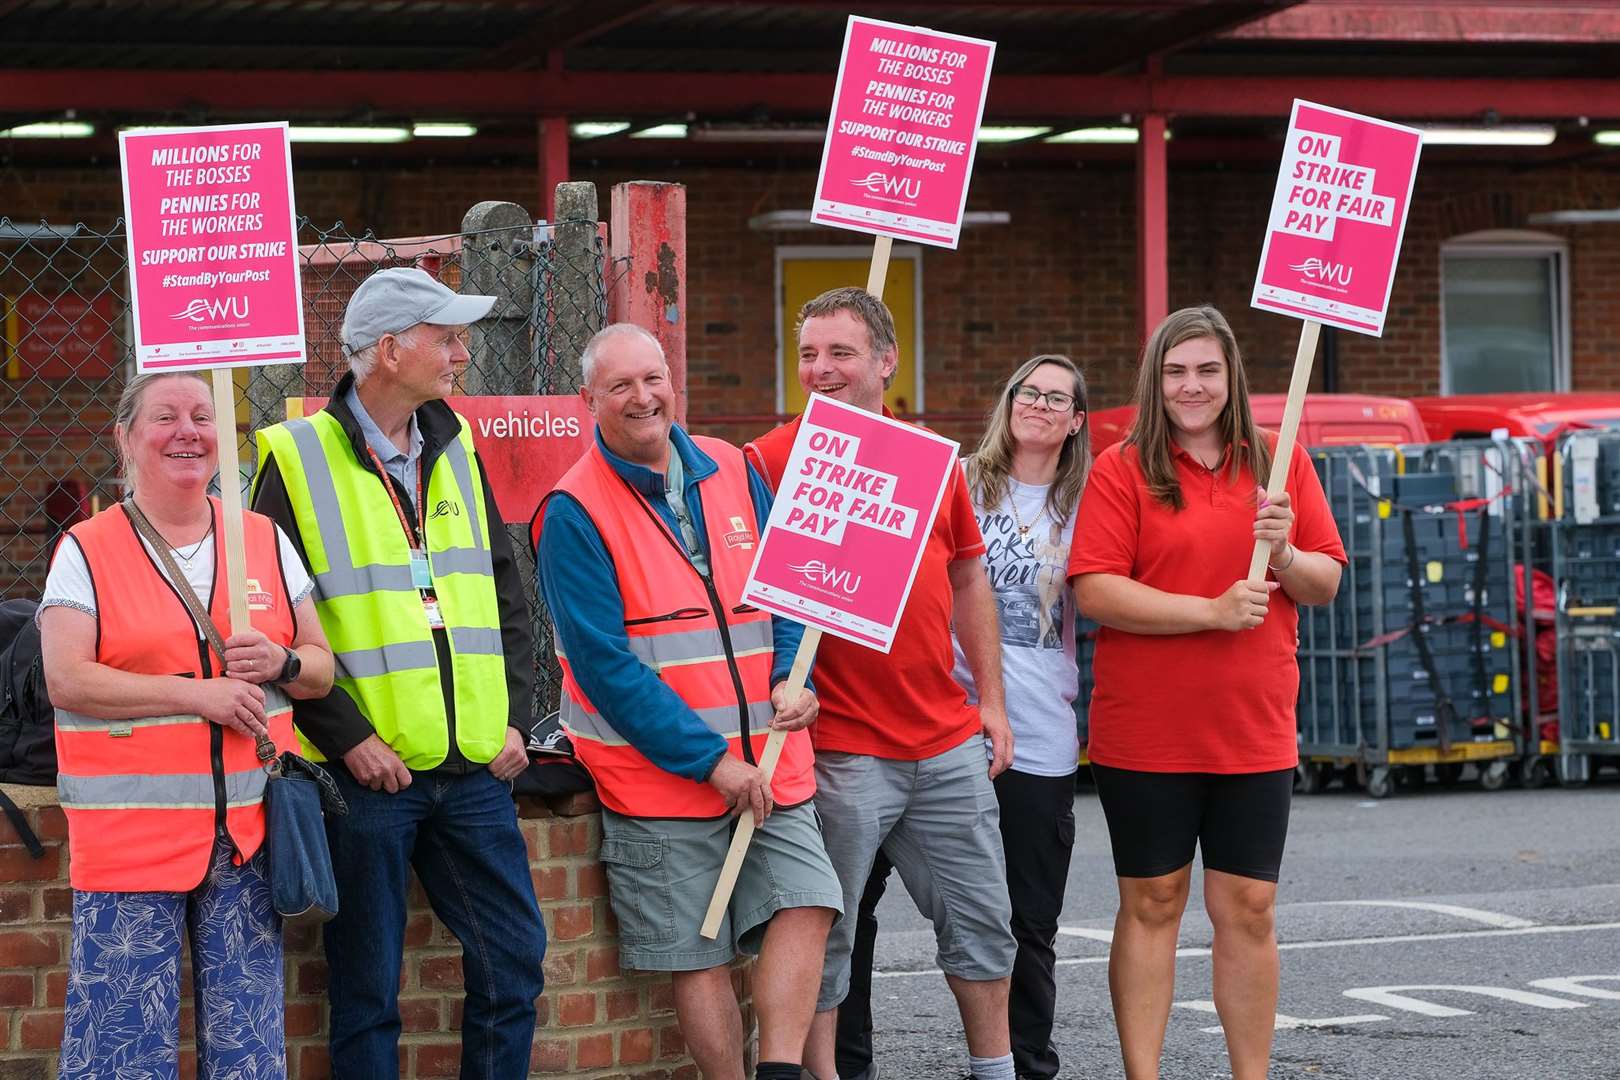 Royal Mail is warning of severe delays as its workers walk out in rows over pay